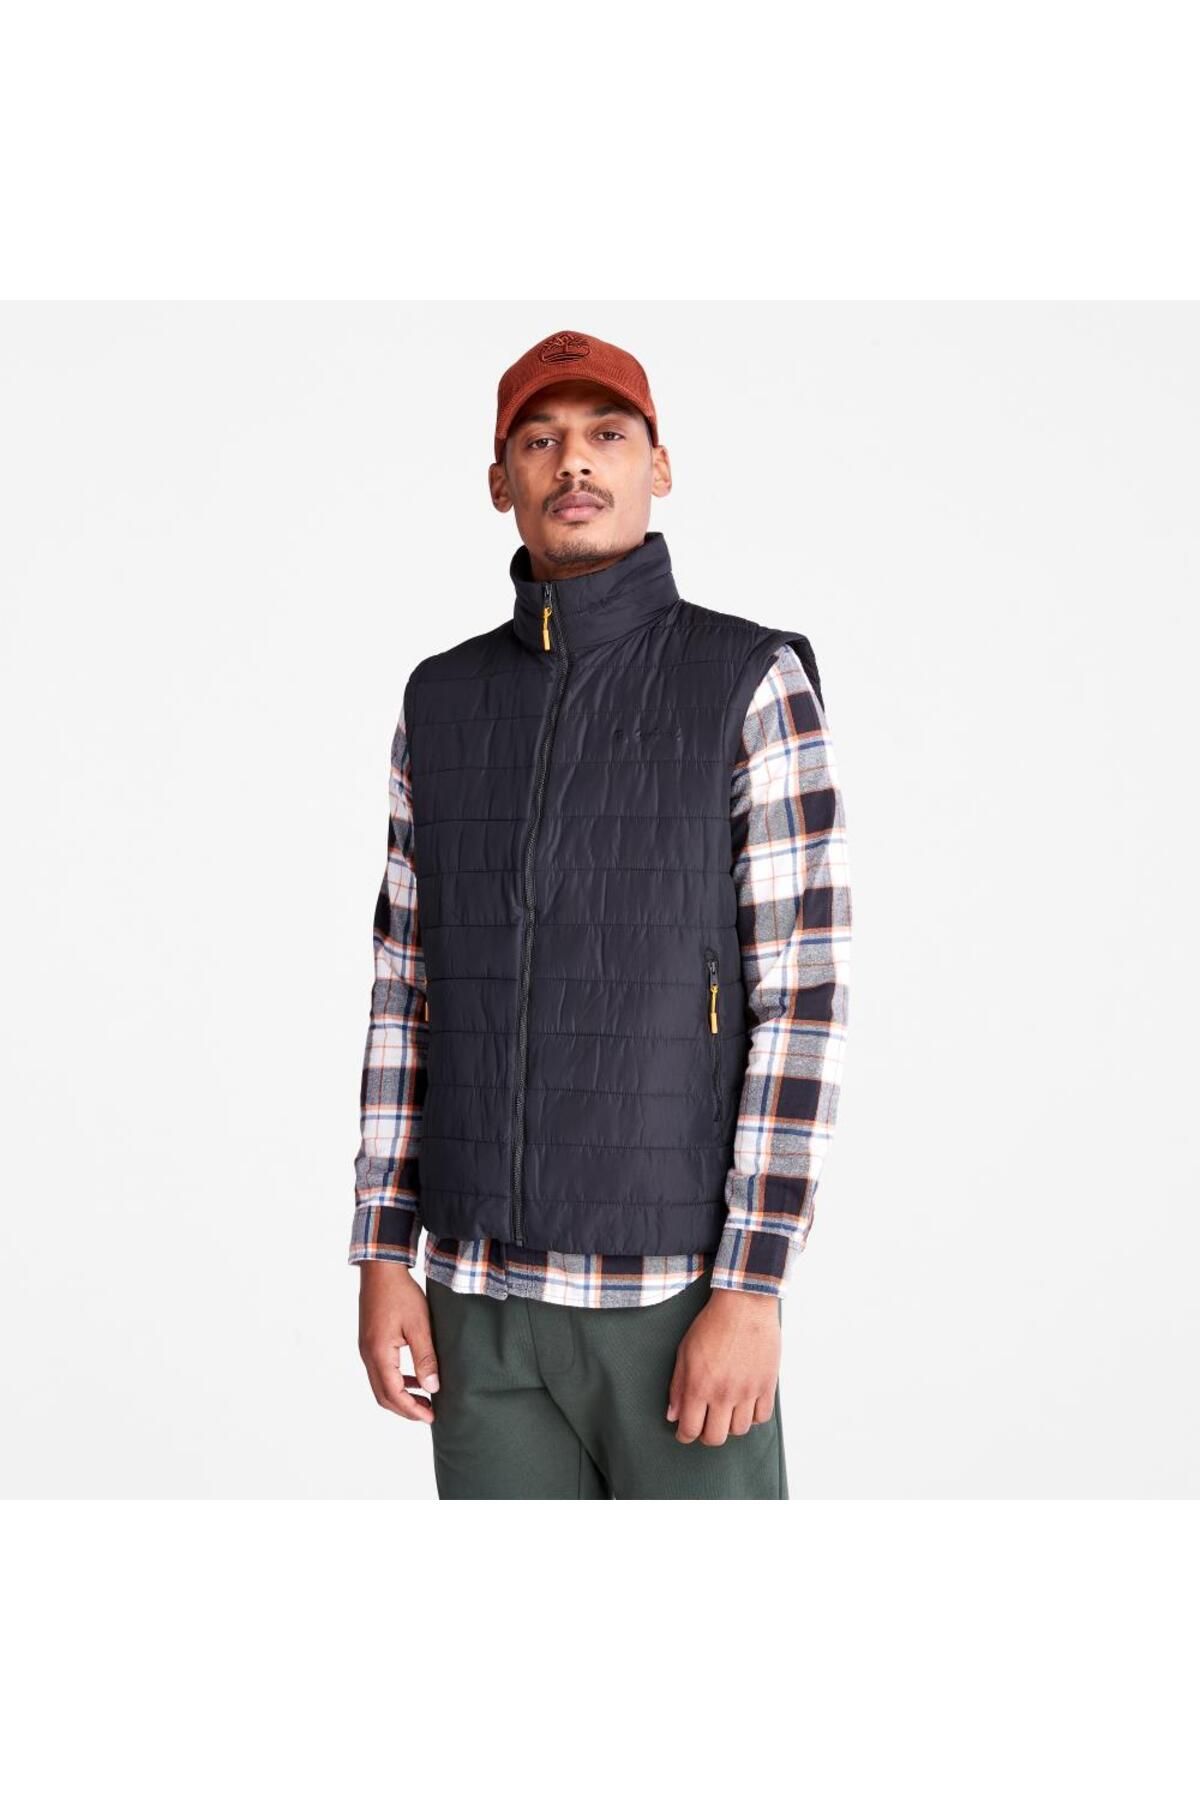 Timberland TİMBERLAND Durable Water Repellent Vest TB0A5XR50011